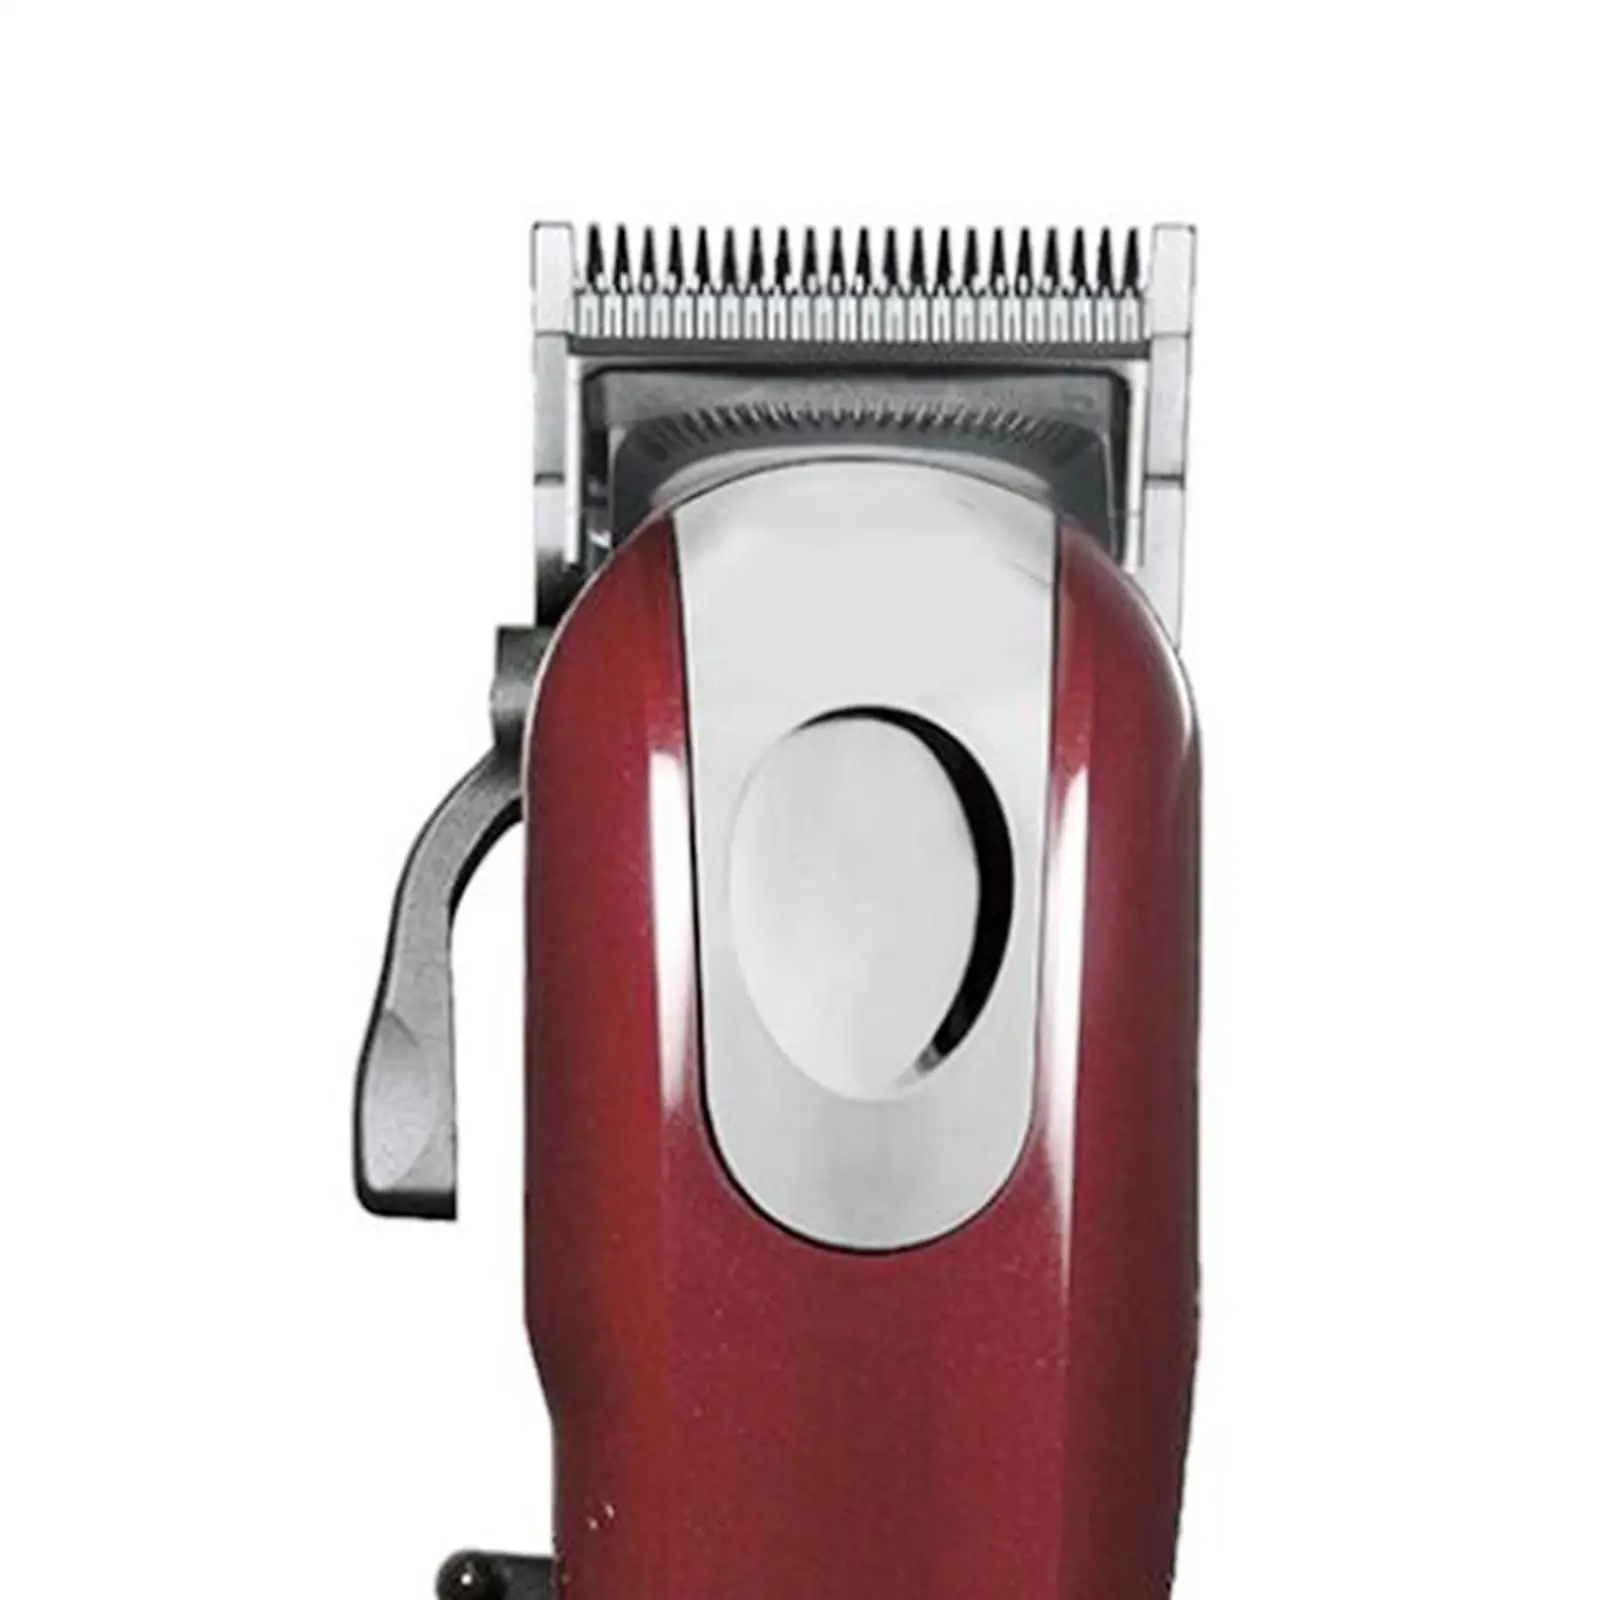 Electric Hair Clipper 8148 UK Power Adapter for Personal Use Multifunctional with Oil Bottle Grooming Durable Cord and Cordless